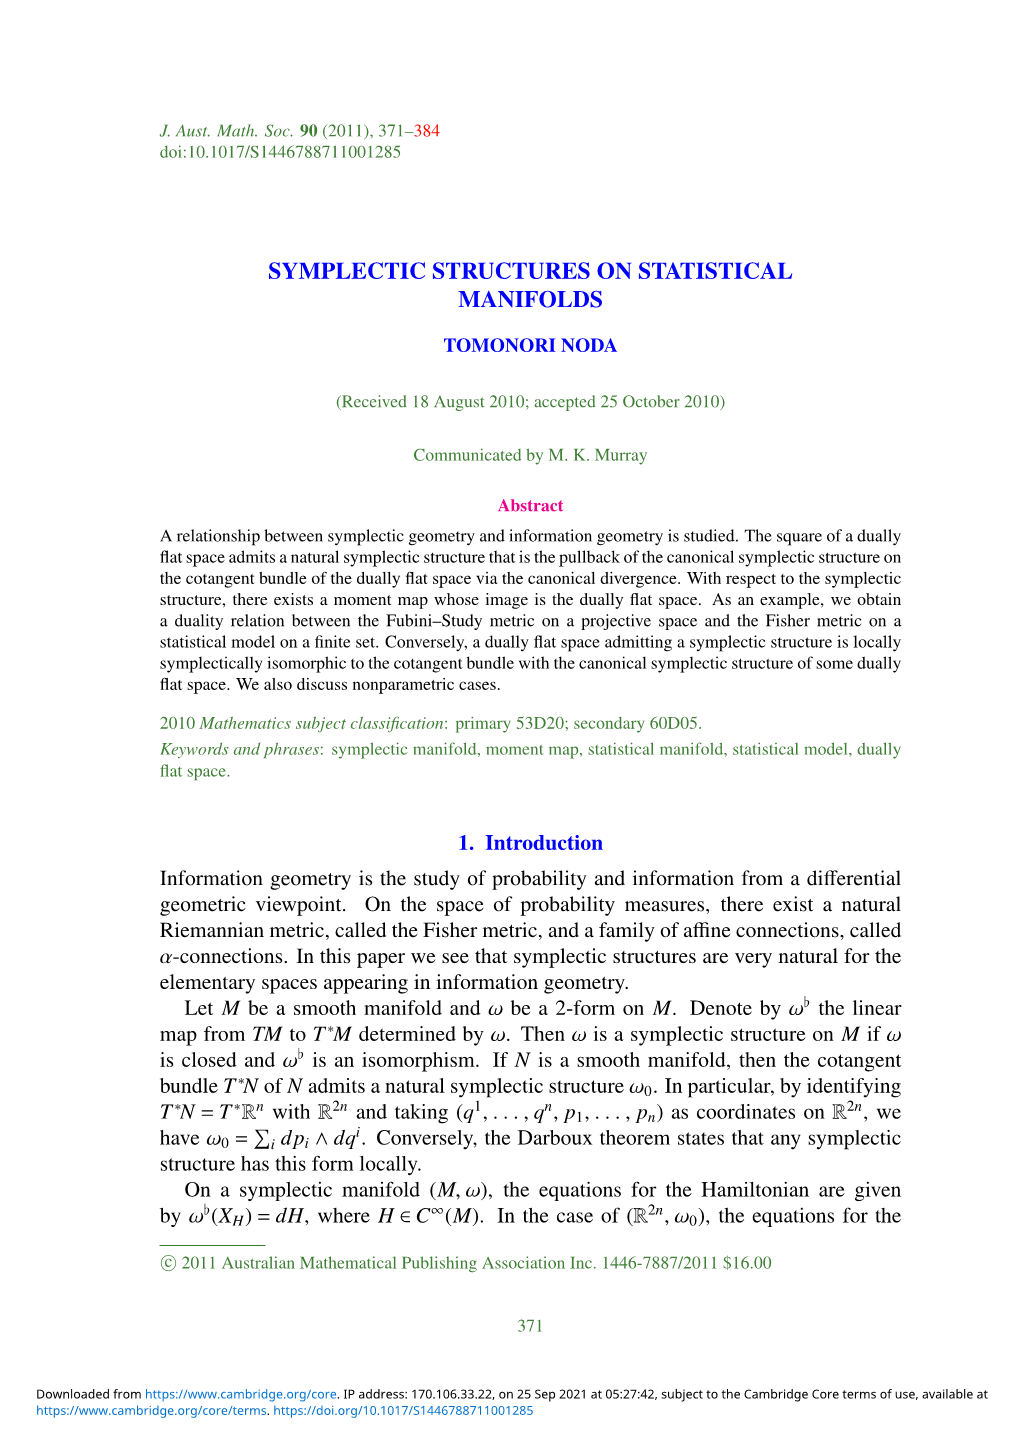 Symplectic Structures on Statistical Manifolds